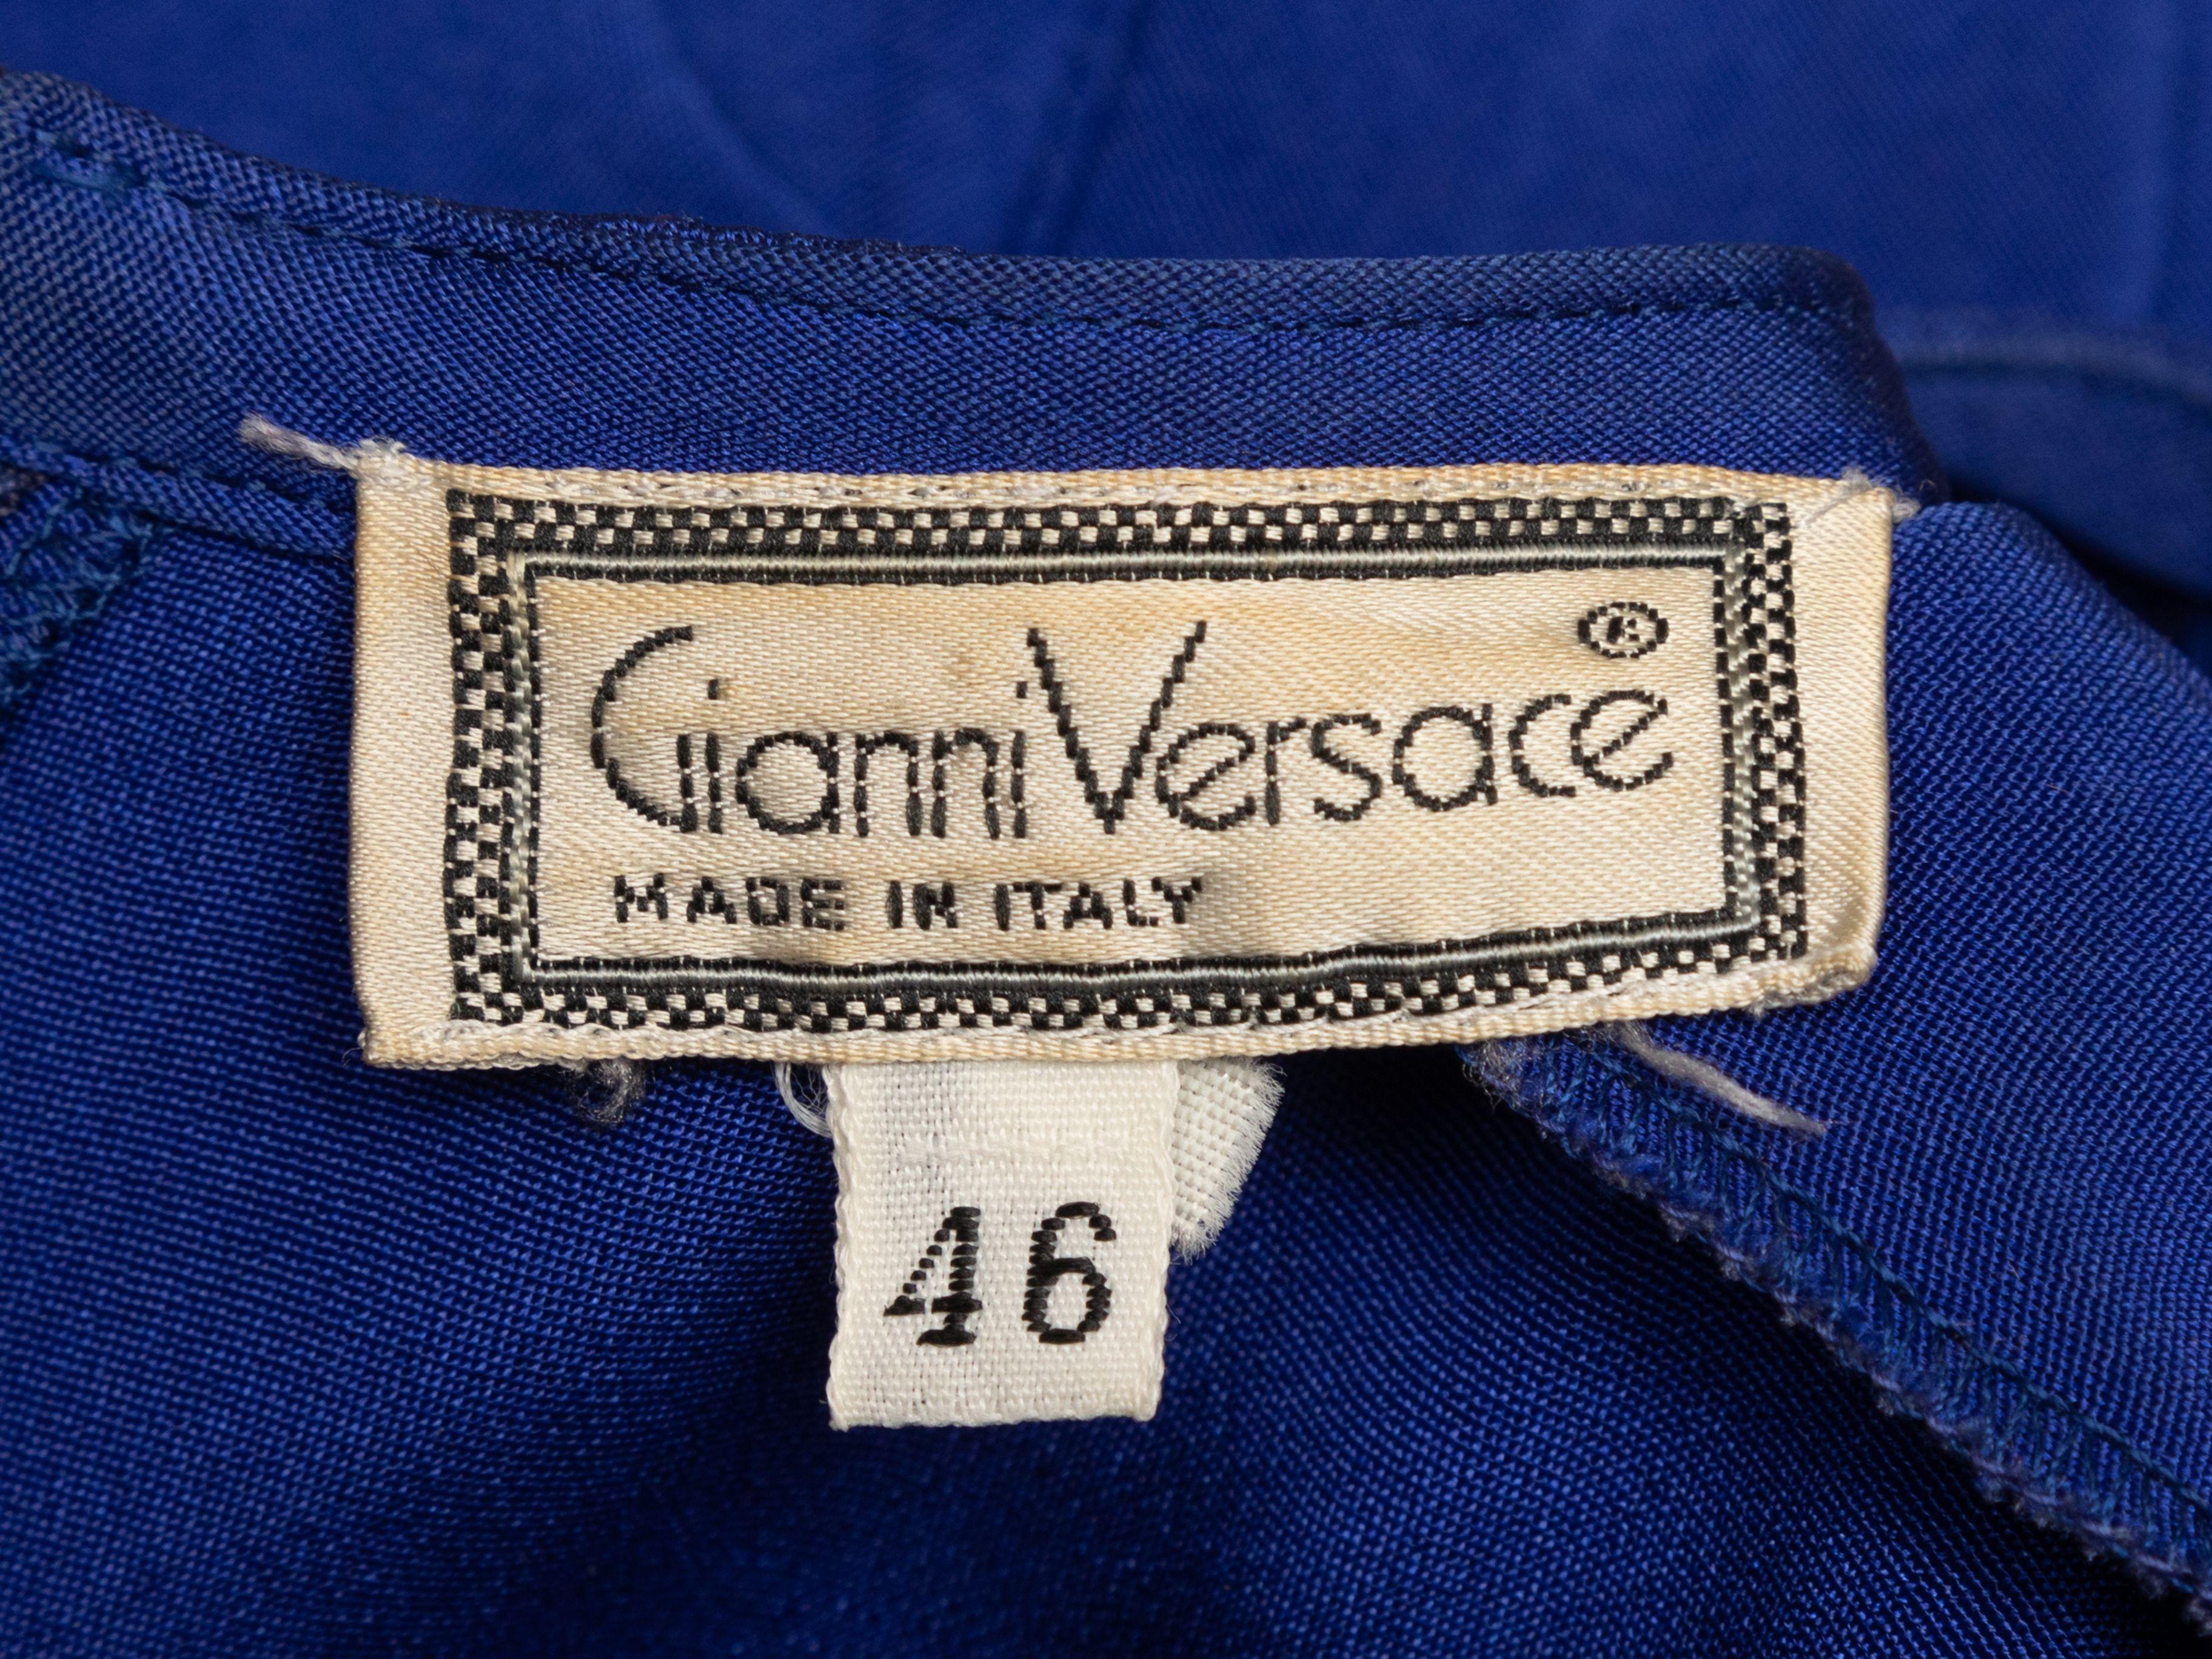 Product Details: Vintage blue long sleeve knee-length dress by Gianni Versace. Crew neck. Tie accent at side. Zip closure at back. Designer size 46. 38